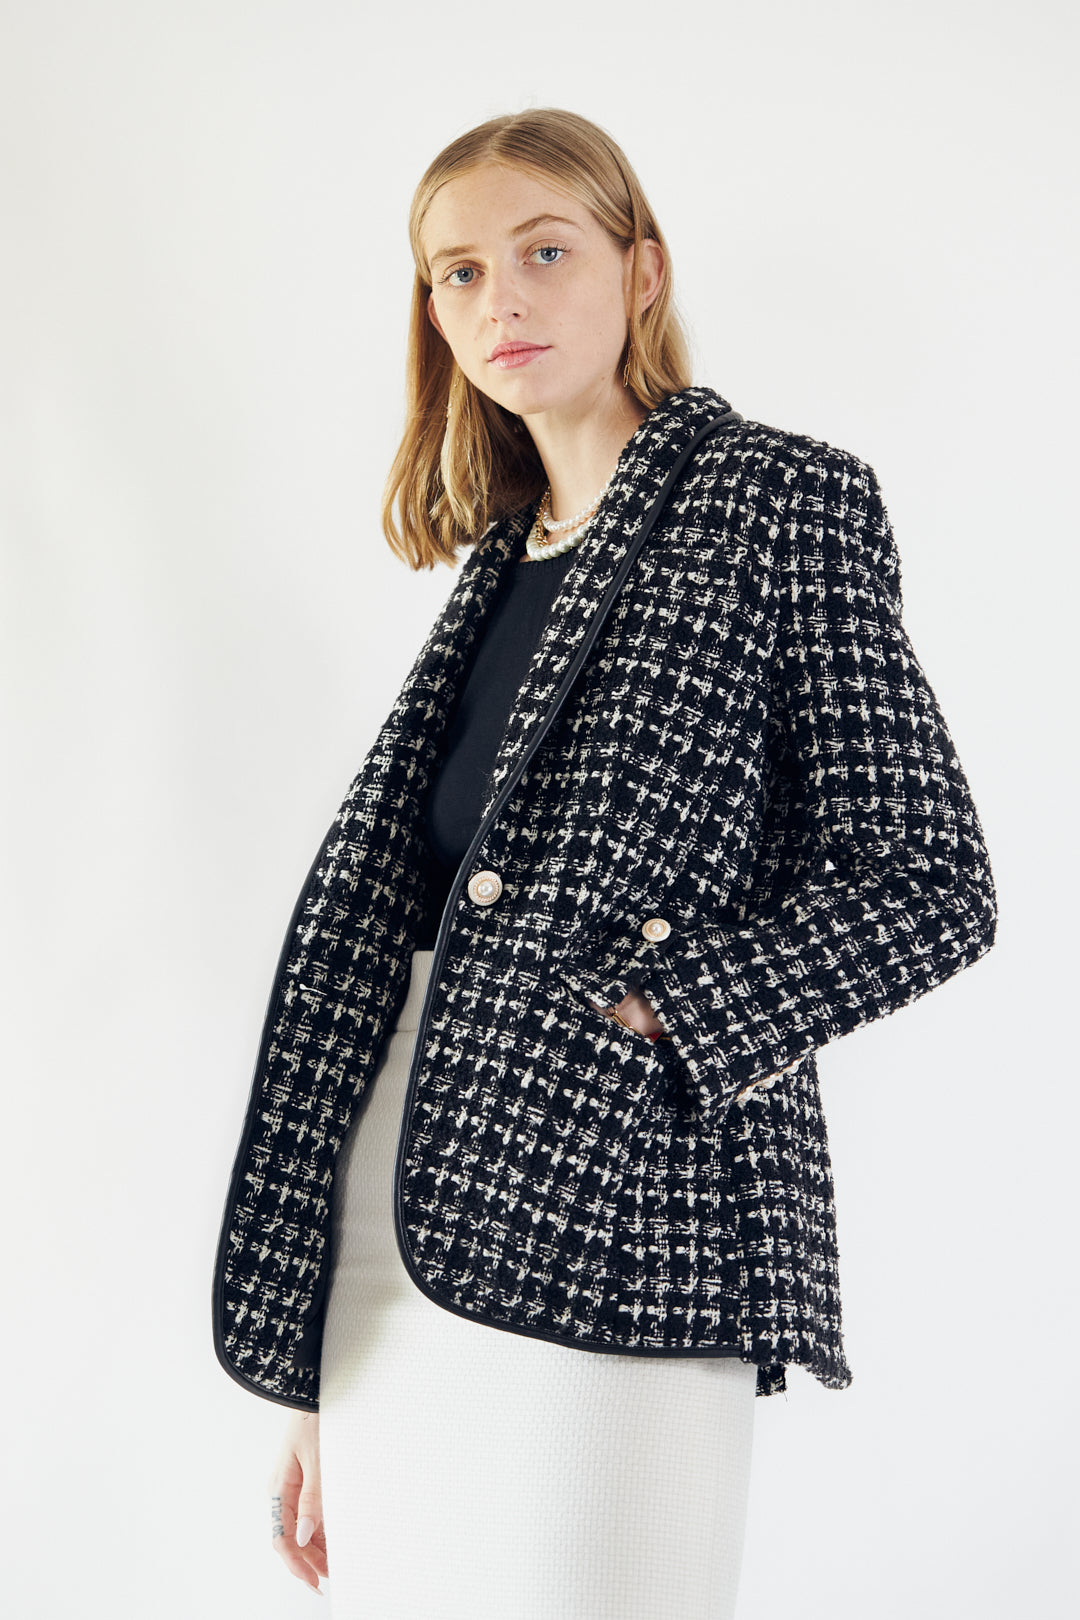  Power Woman - Black & White Tweed Checkers Jacket: Embrace Classic Sophistication with Le Réussi